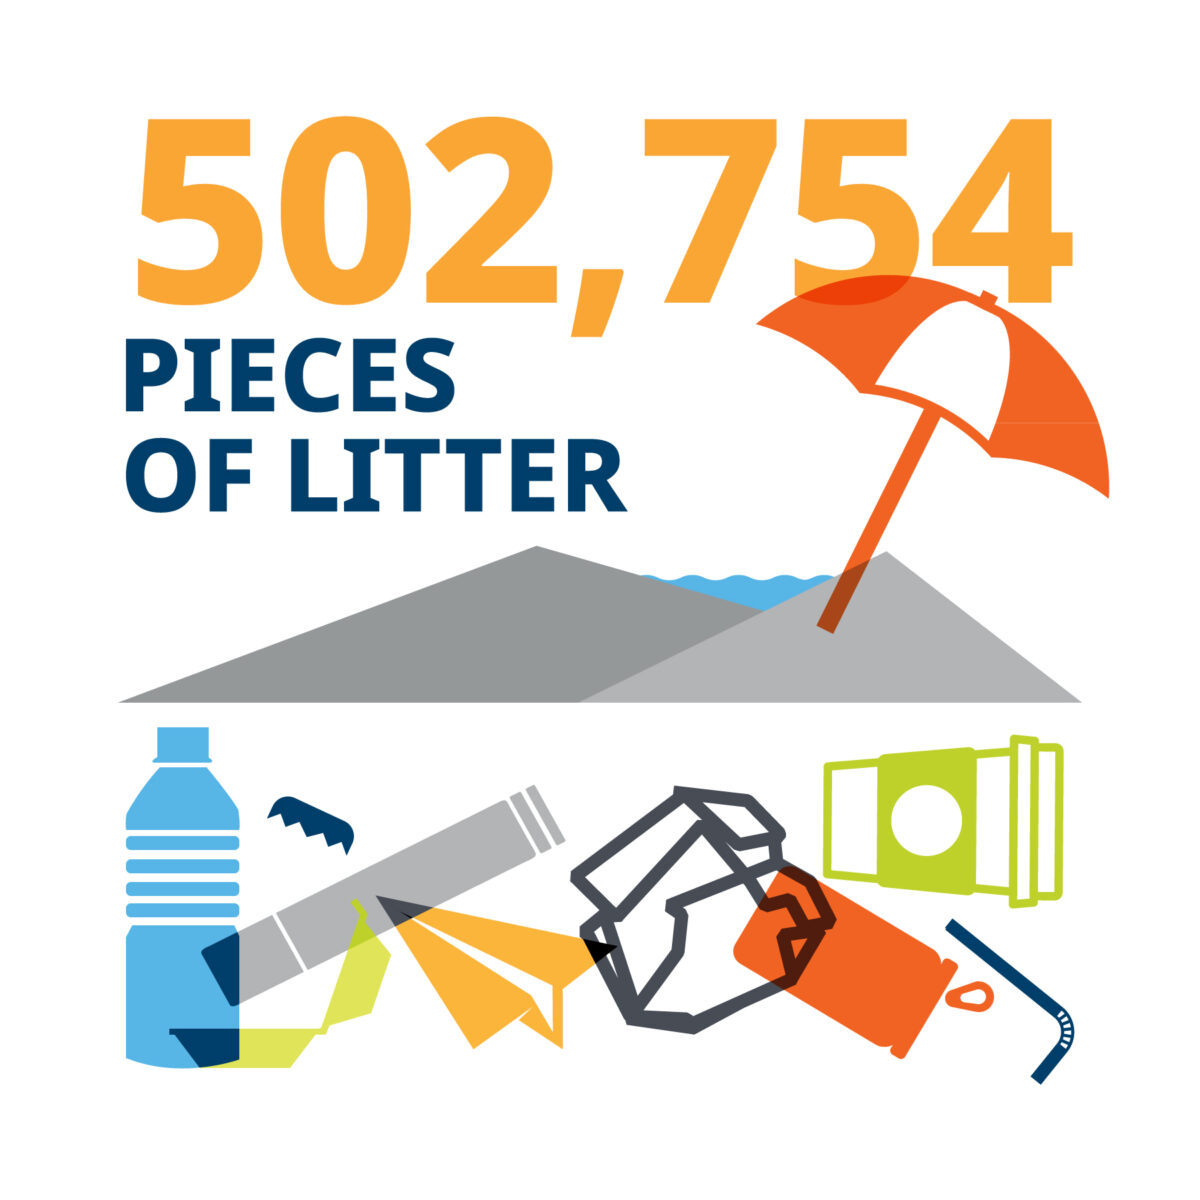 502,754 pieces of litter.